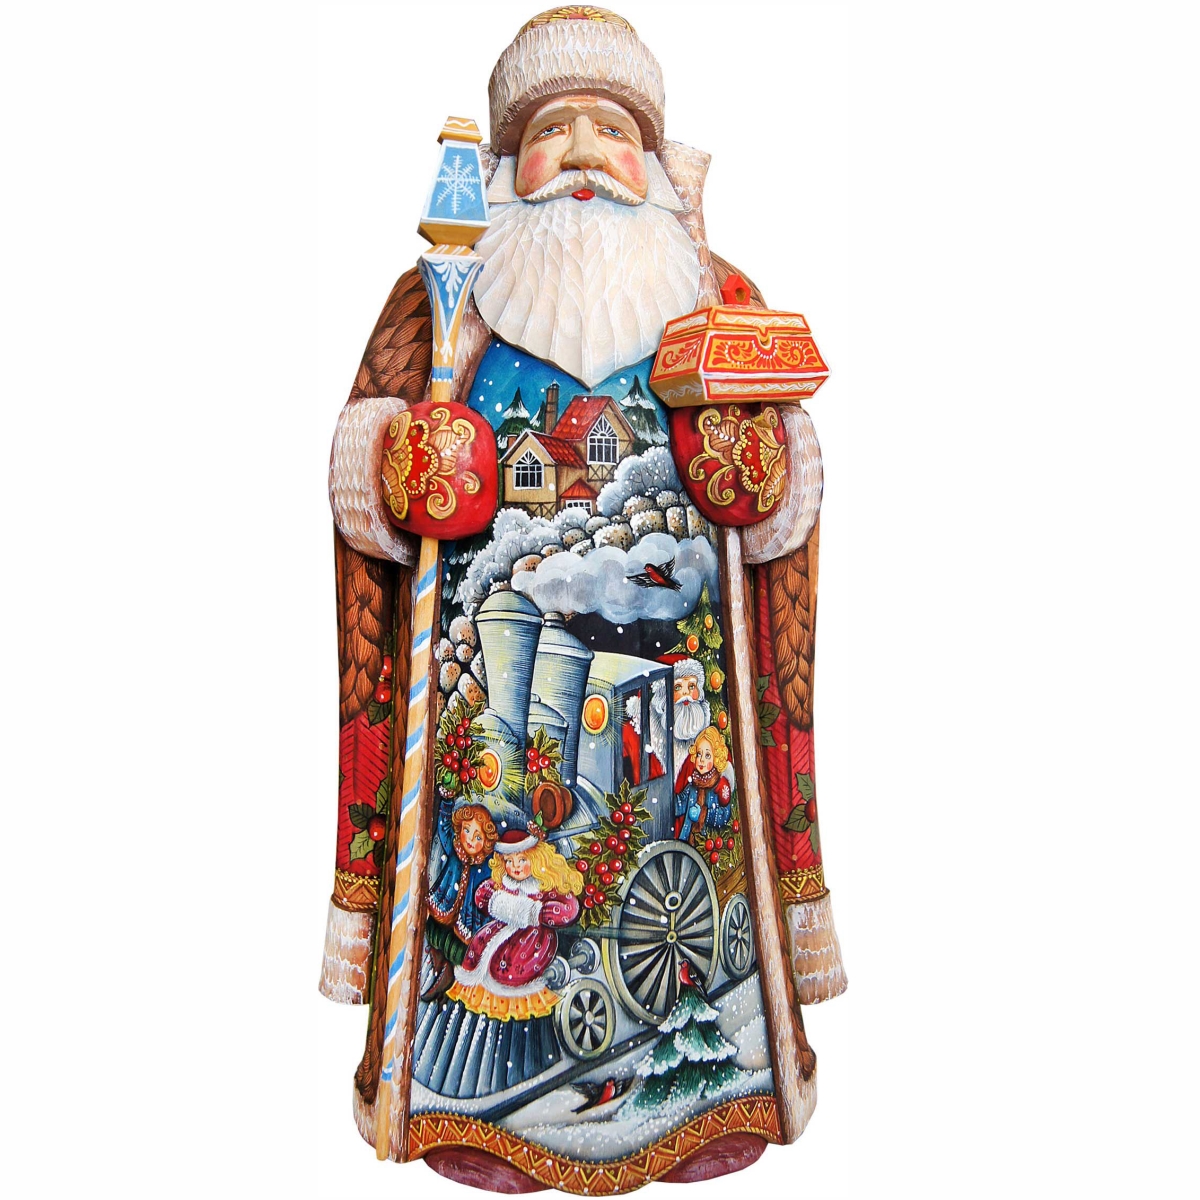 Picture of G.DeBrekht 215632 Train Ride Wood Carved Hand Painted Santa Clause Figurine